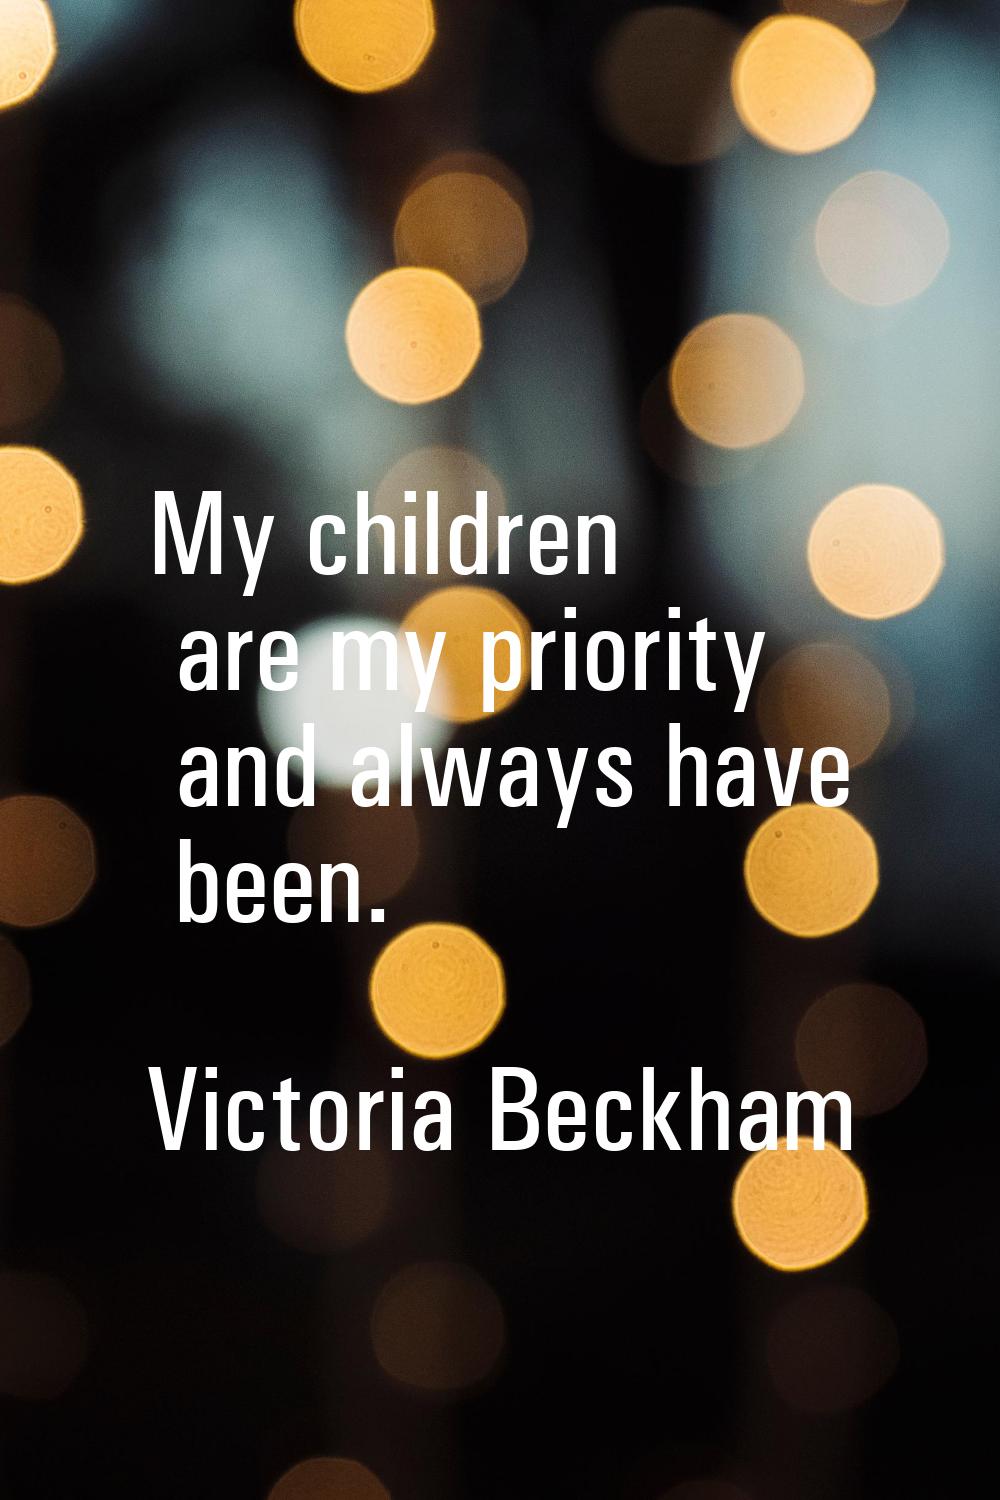 My children are my priority and always have been.